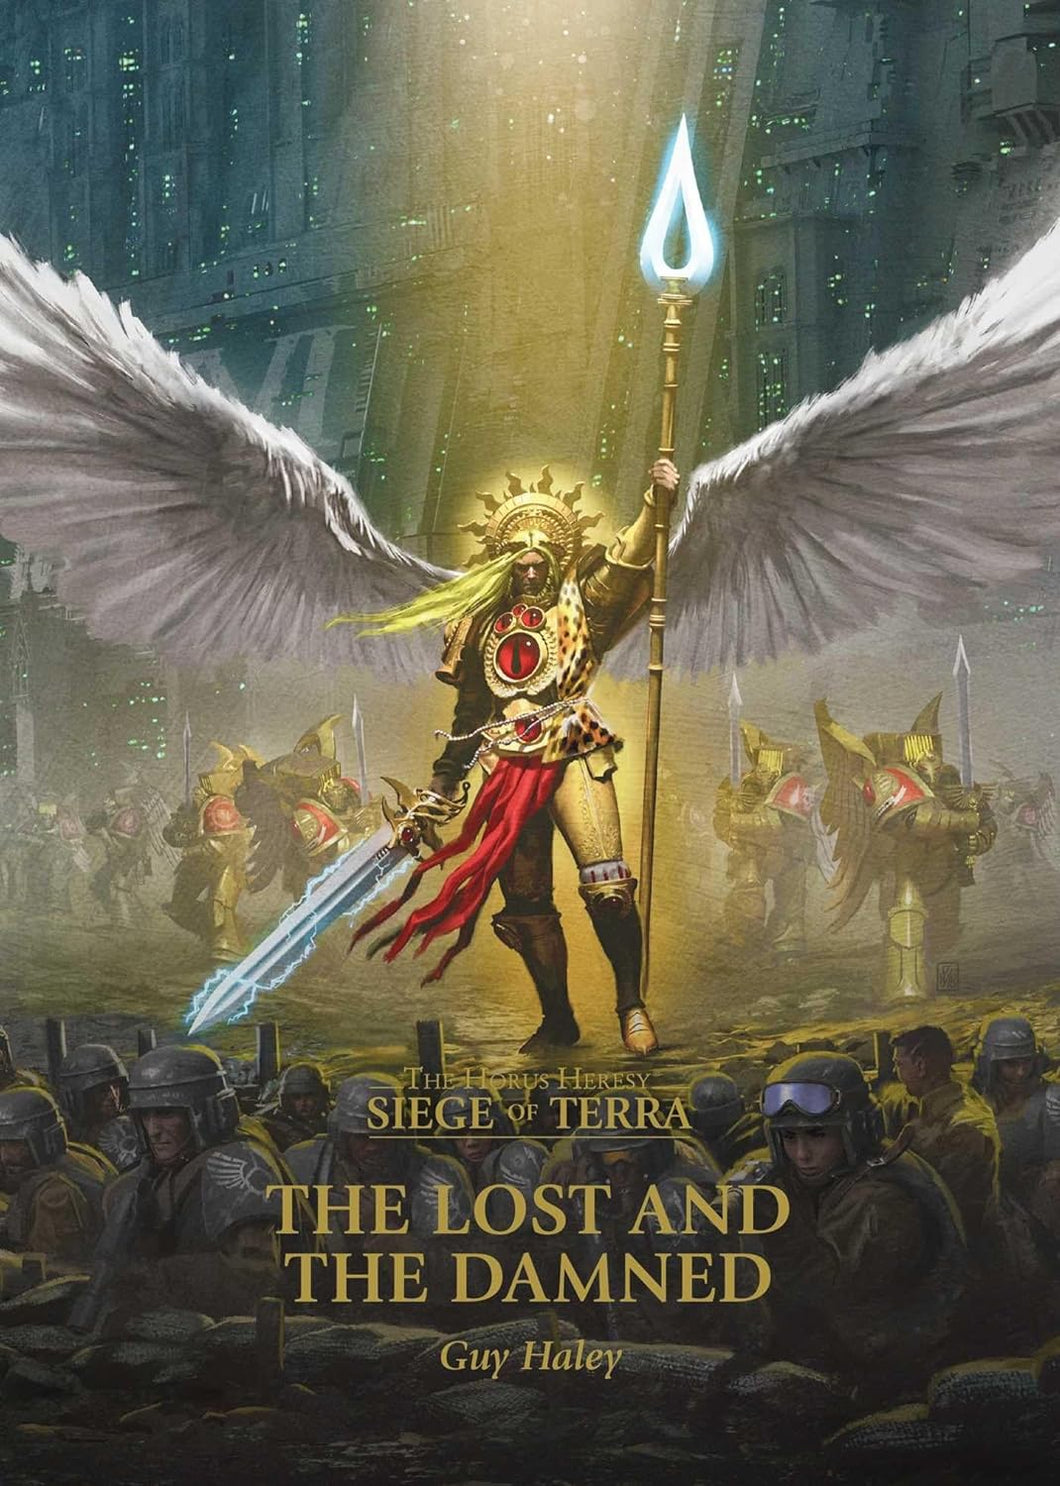 THE HORUS HERESY:SIEGE OF TERRA:THE LOST AND THE DAMNED Book 2; GUY HALEY